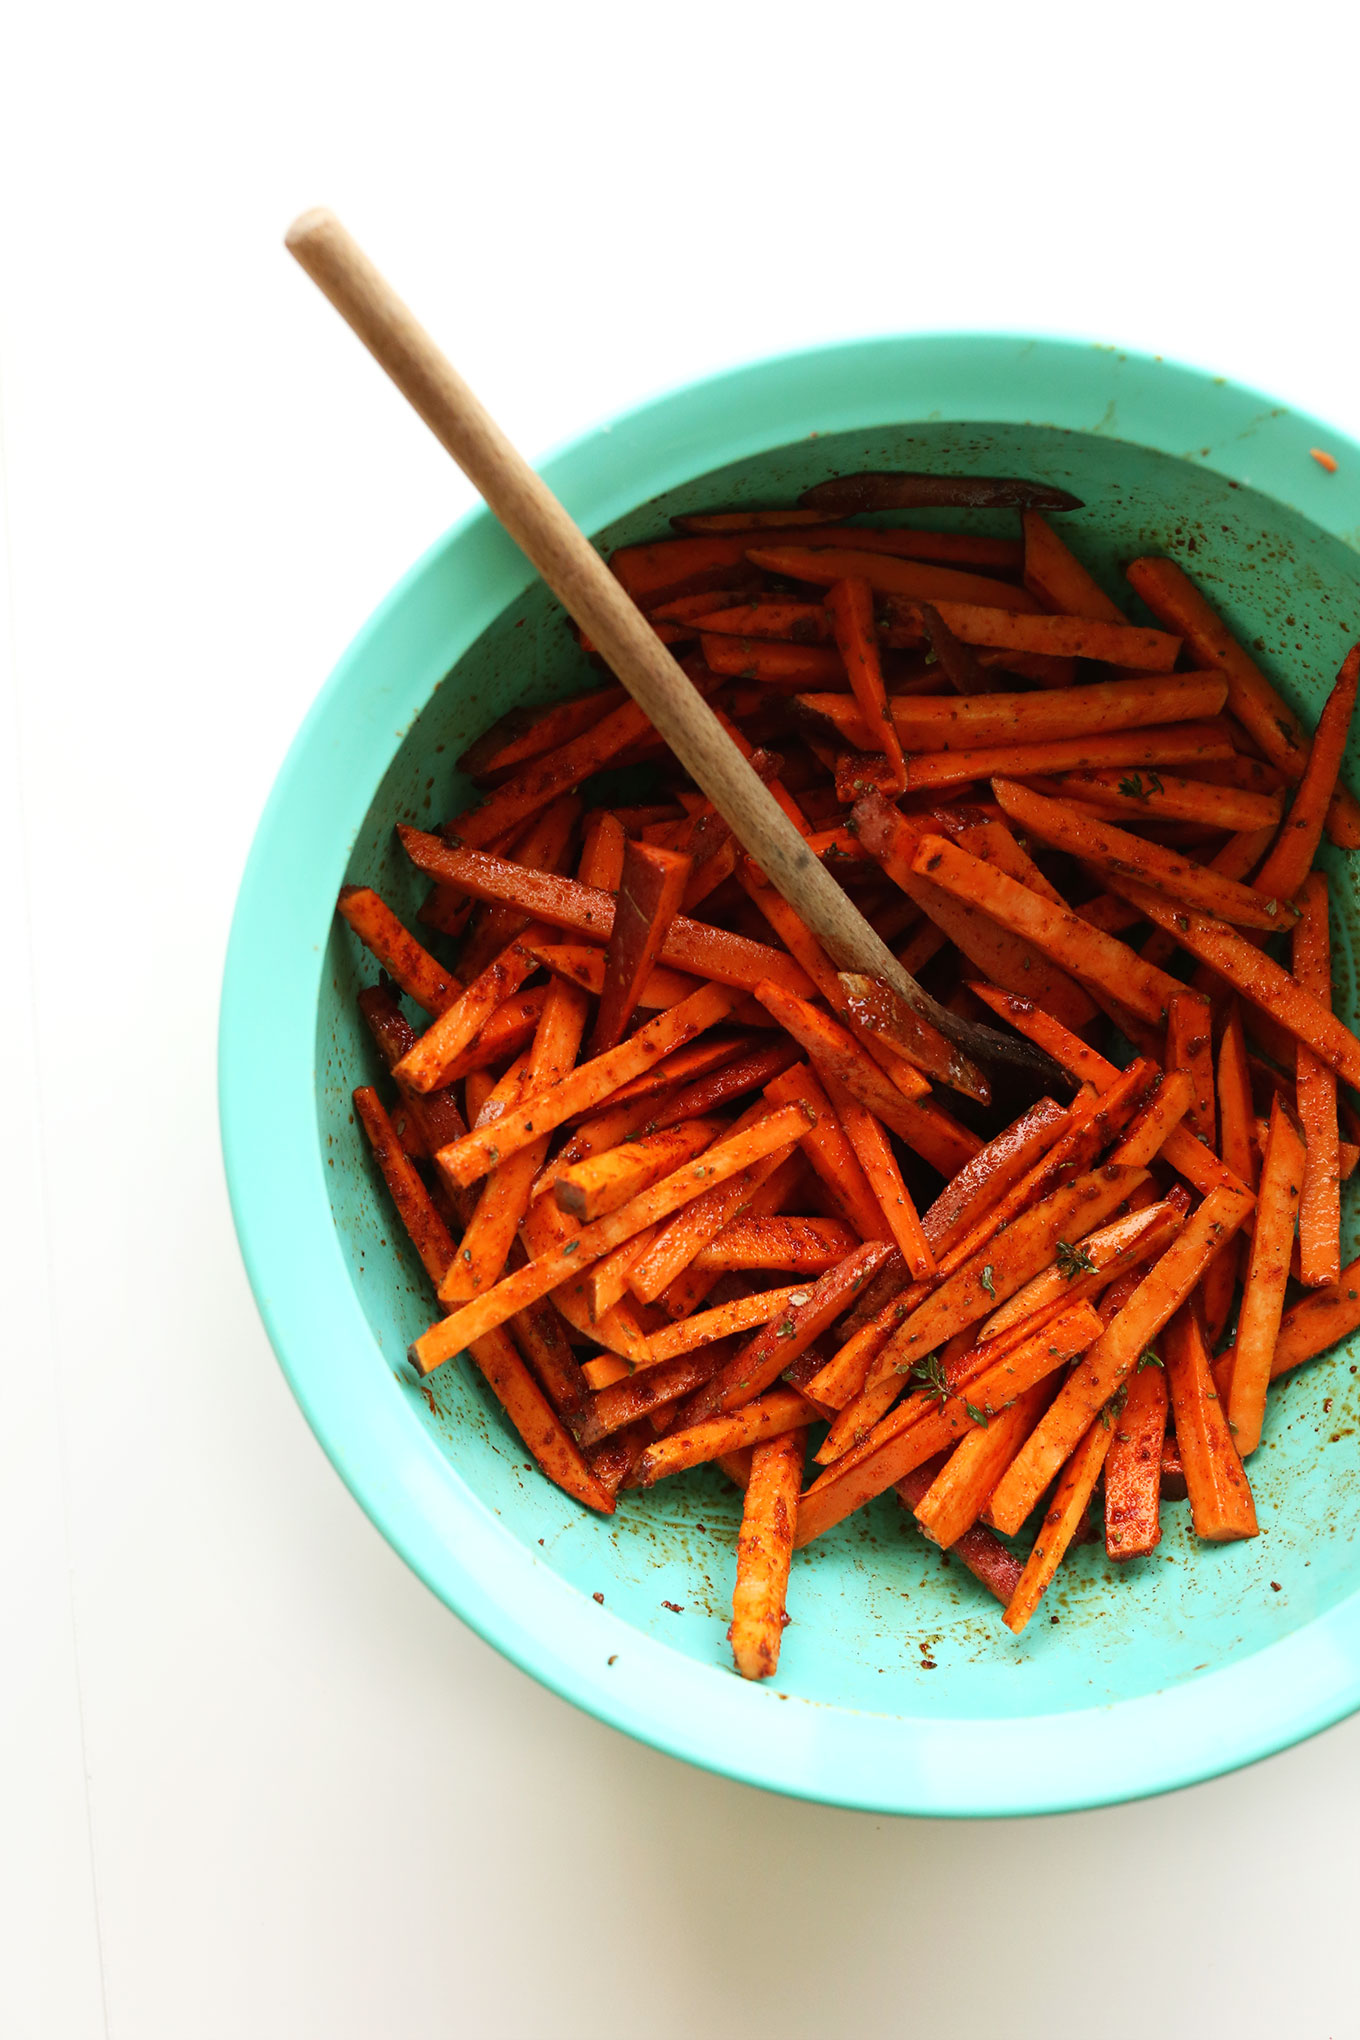 Mixing sweet potatoes and spices for our homemade Cajun Sweet Potato Fries recipe